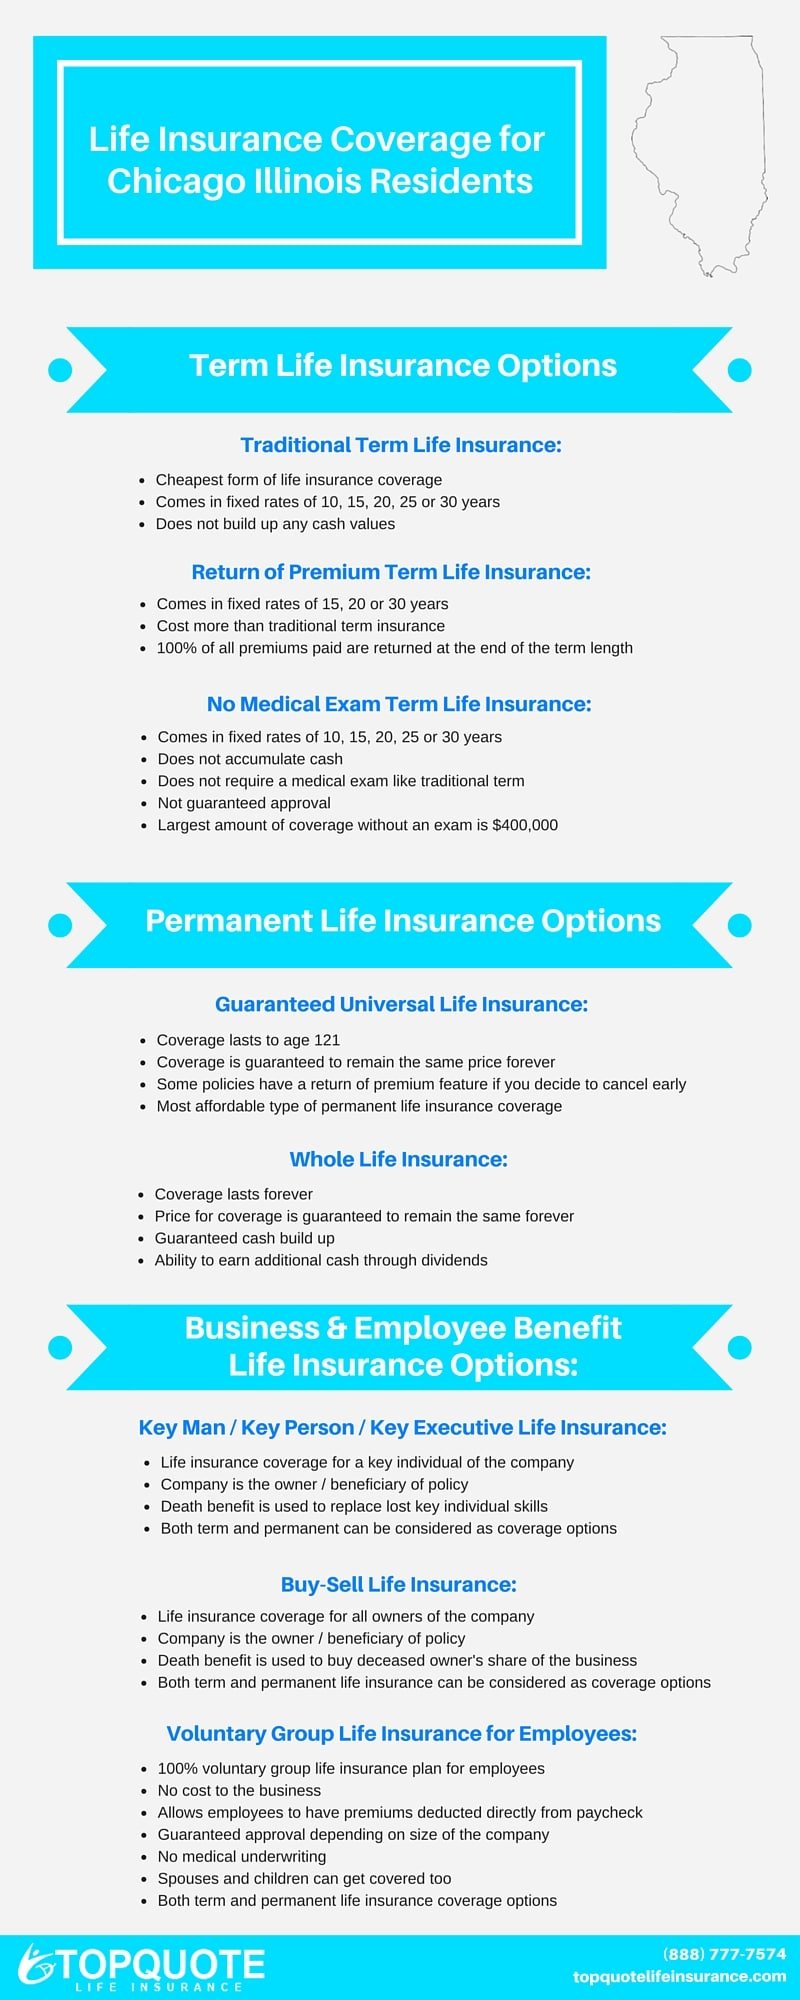 Life Insurance Quotes for Chicago, Illinois Residents